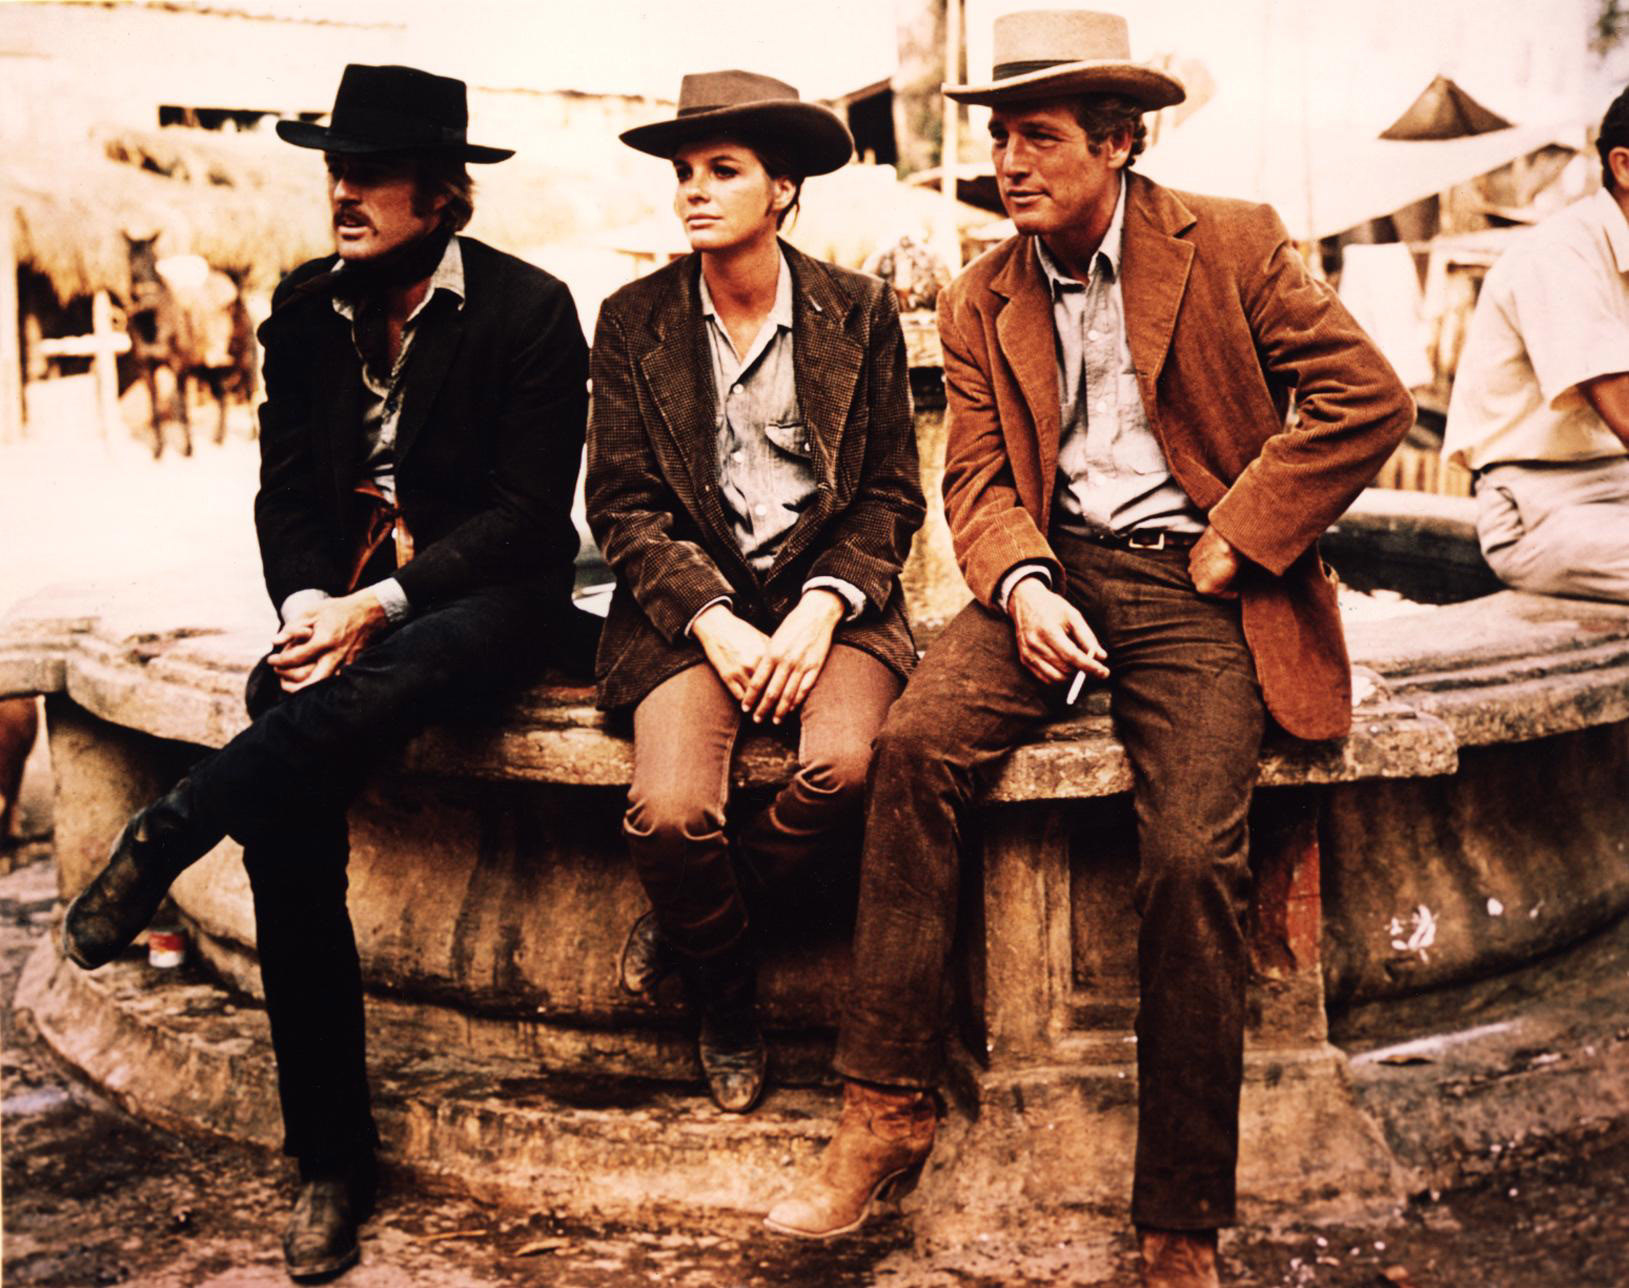 Robert Redford, Katharine Ross, and Paul Newman sit at a fountain